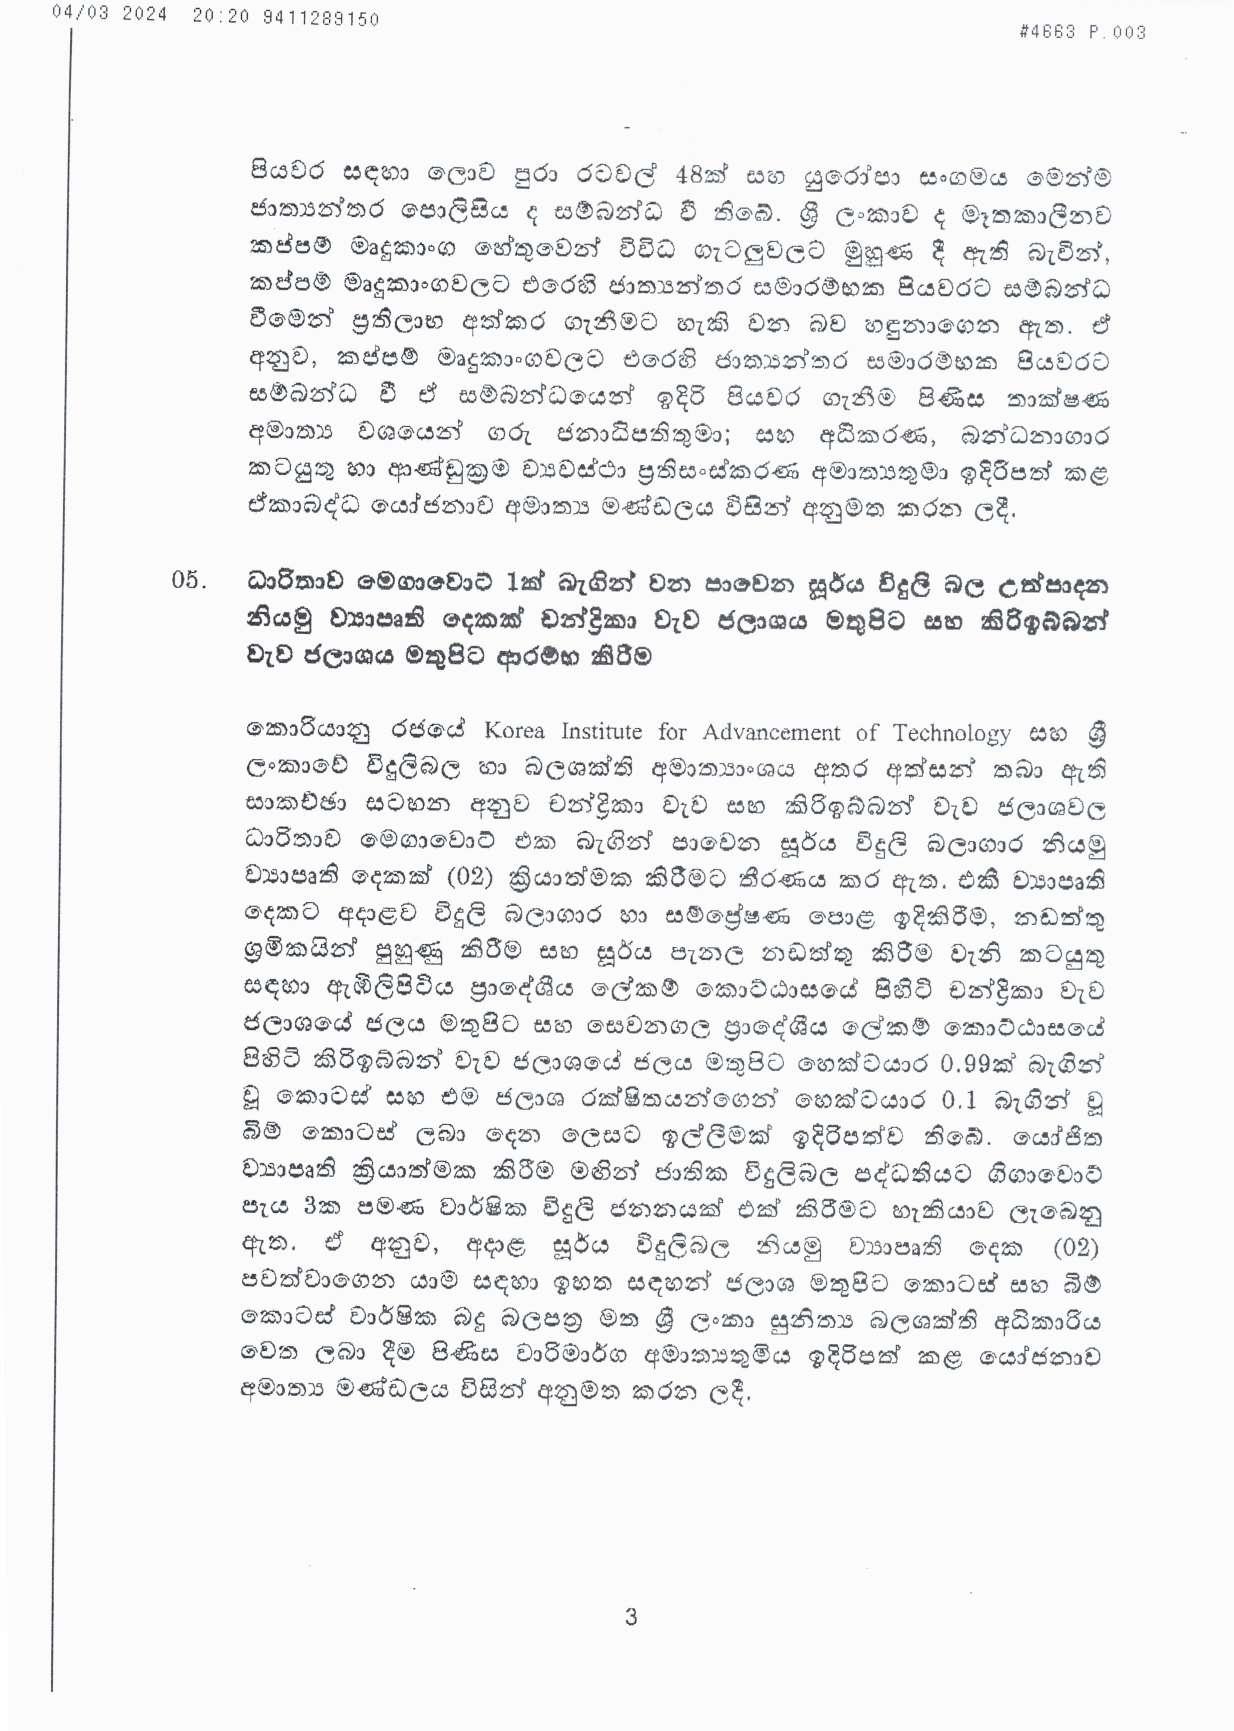 Cabinet Decision on 04.03.2024 page 003